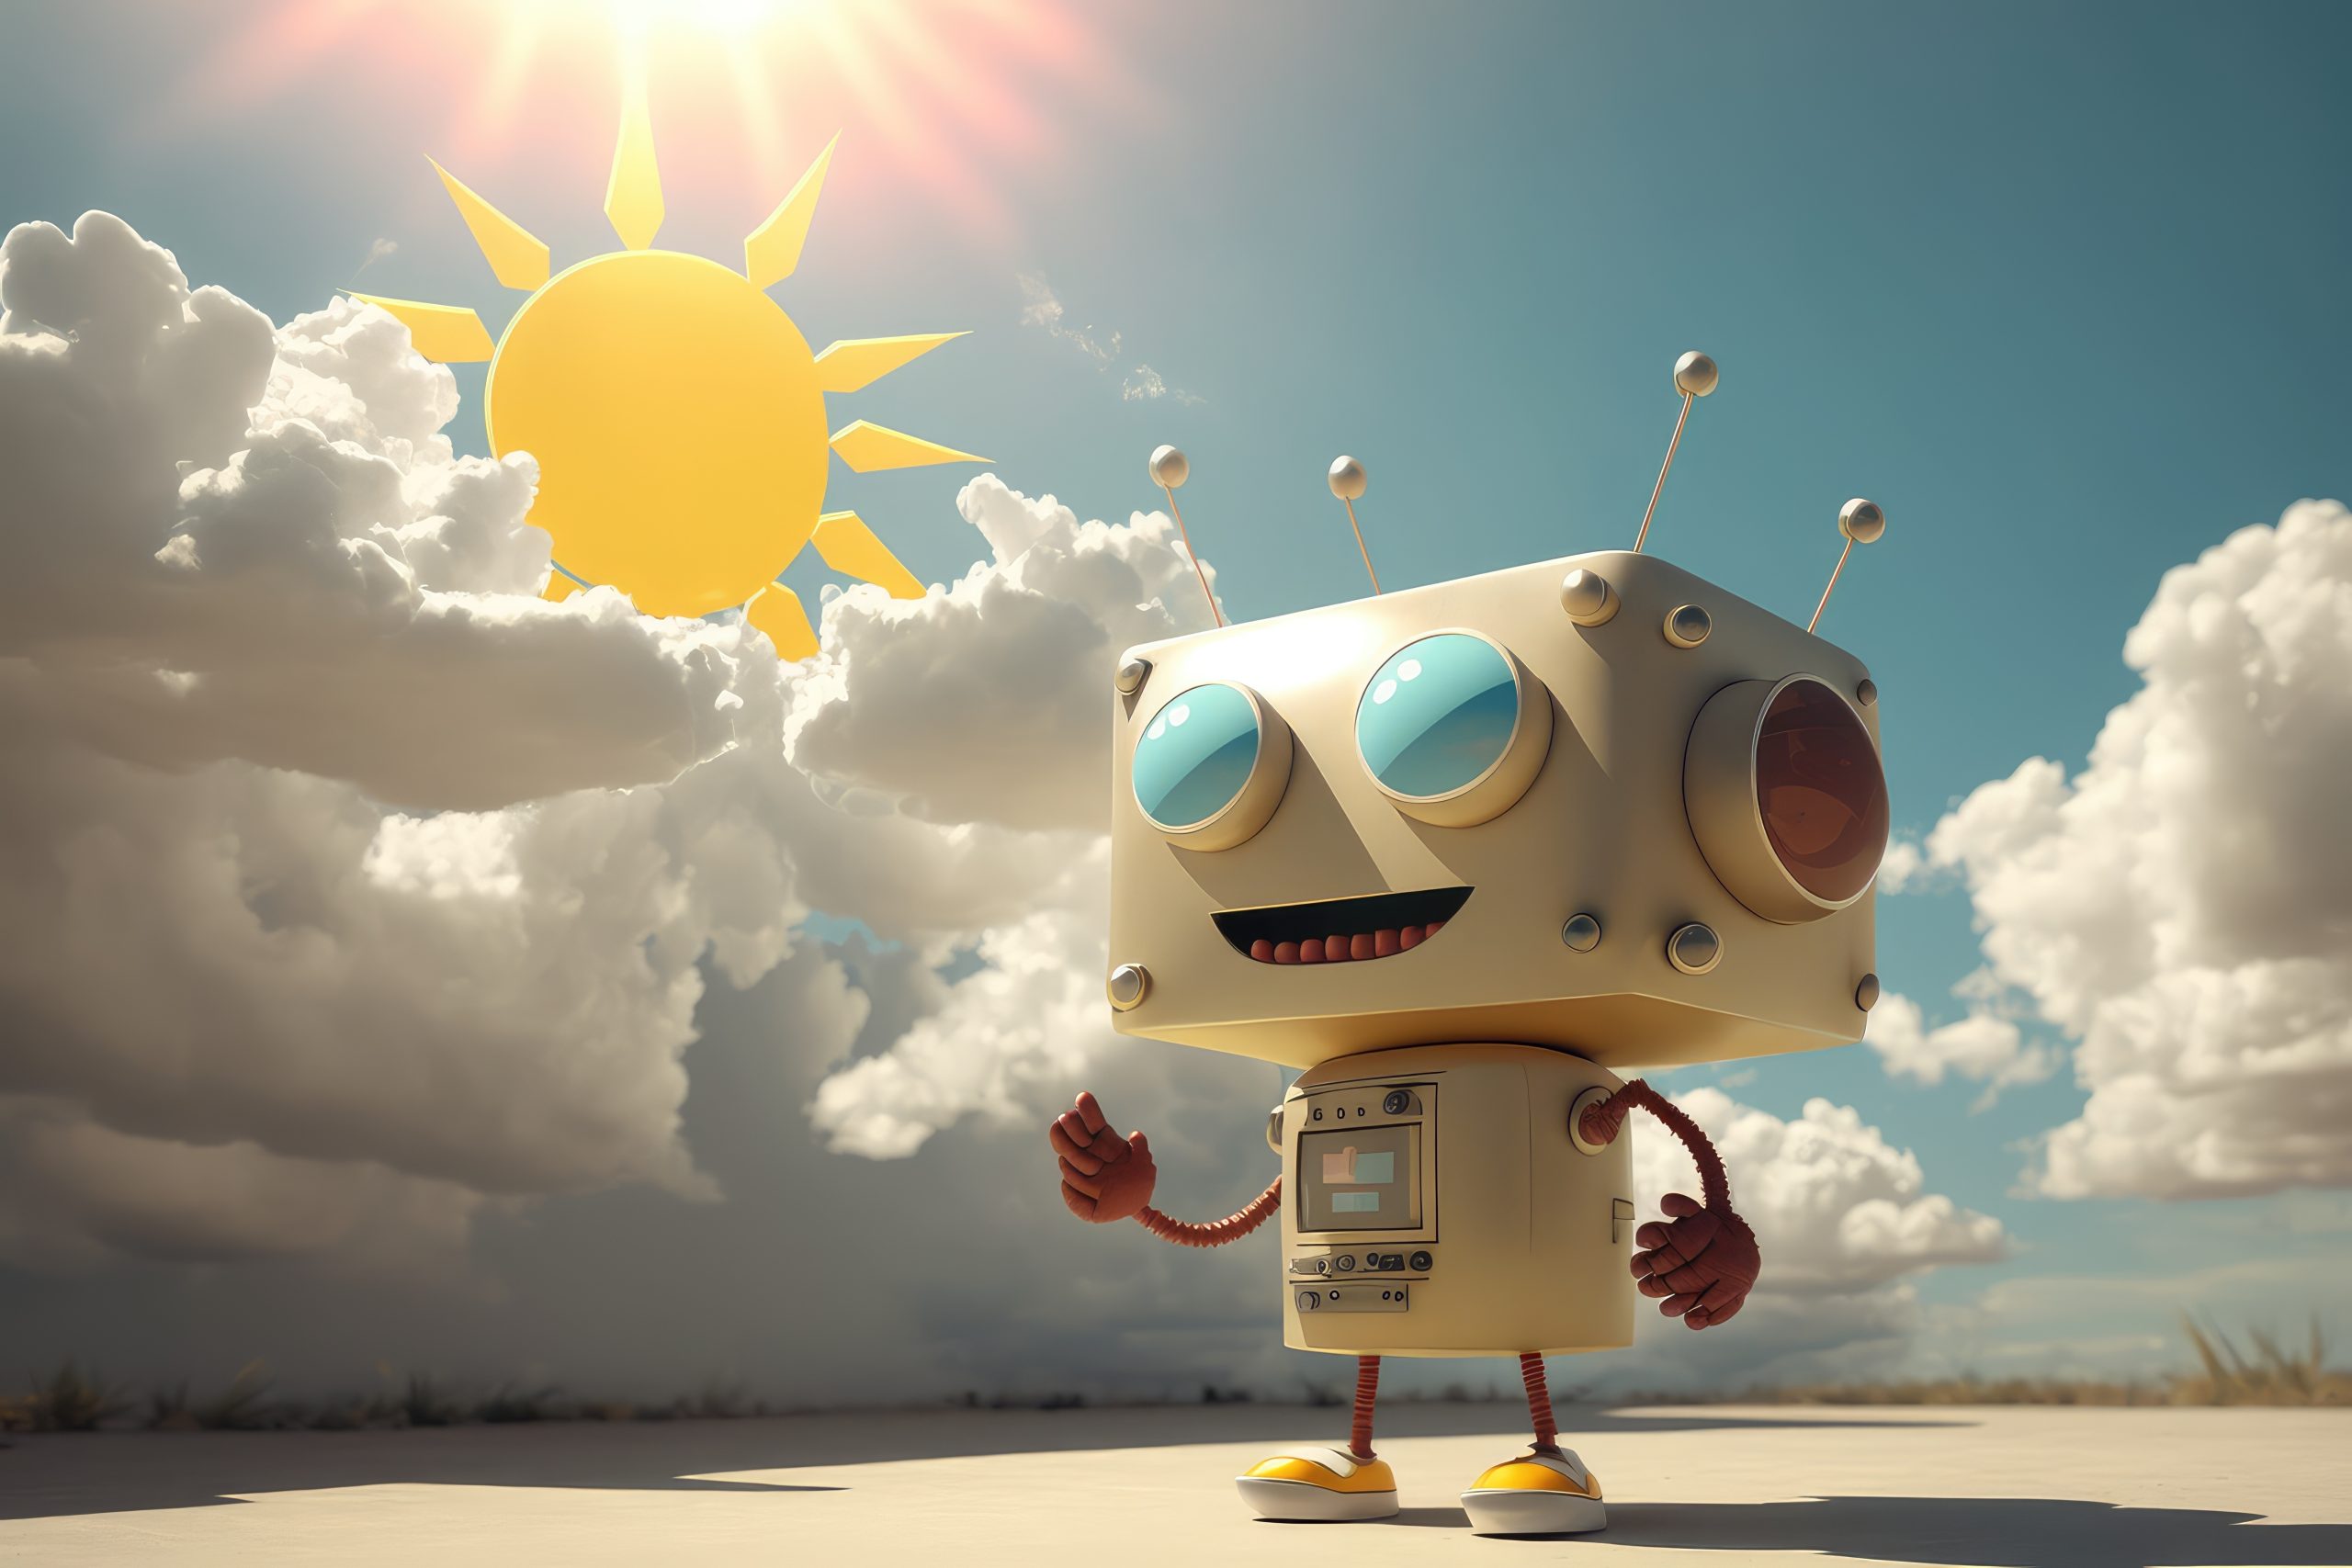 chatbot robot giving the weather forecast, with animated clouds and sun